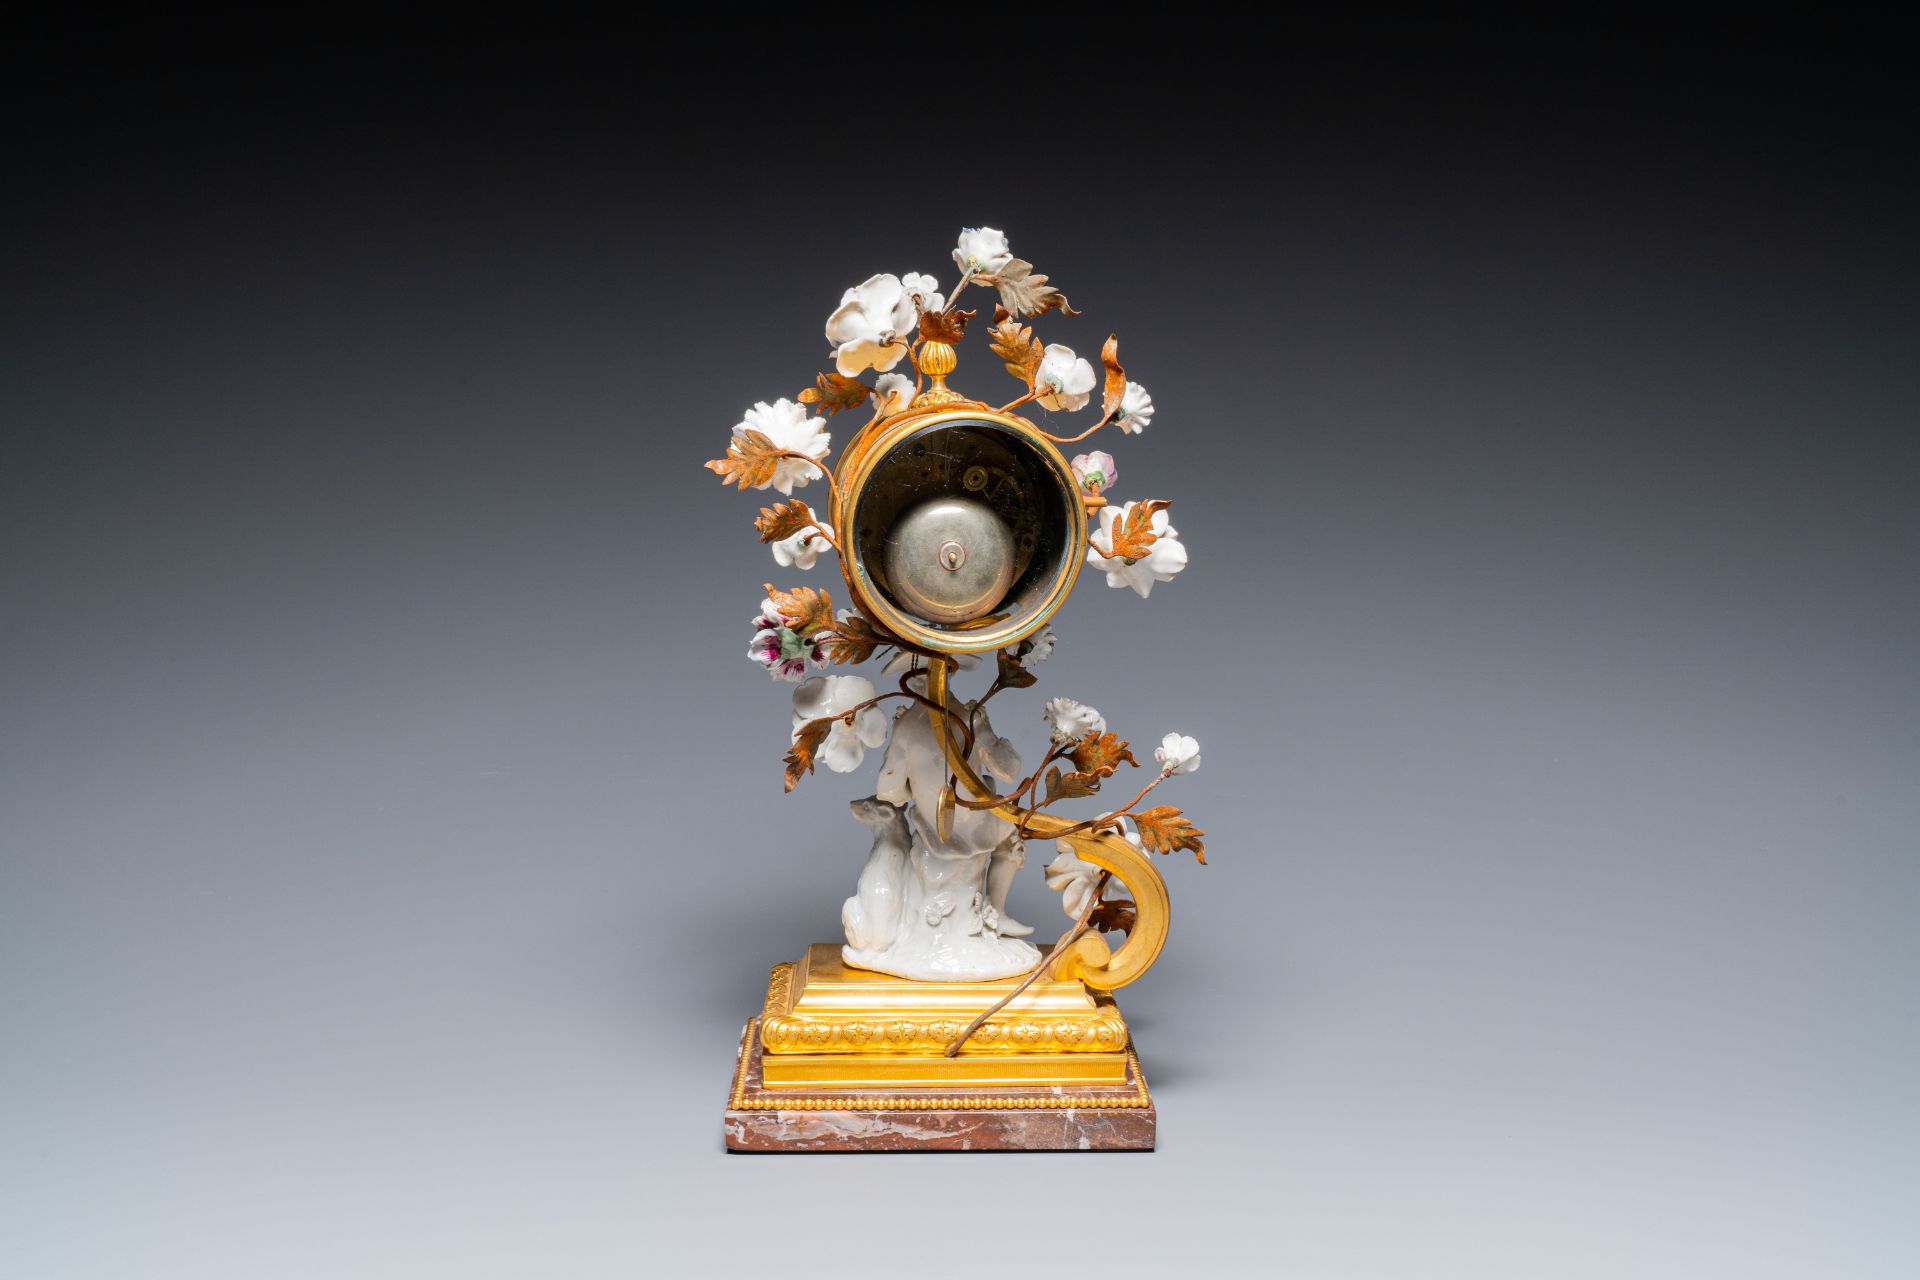 A French ormolu-mounted porcelain mantel clock, 18/19th C. - Image 10 of 28